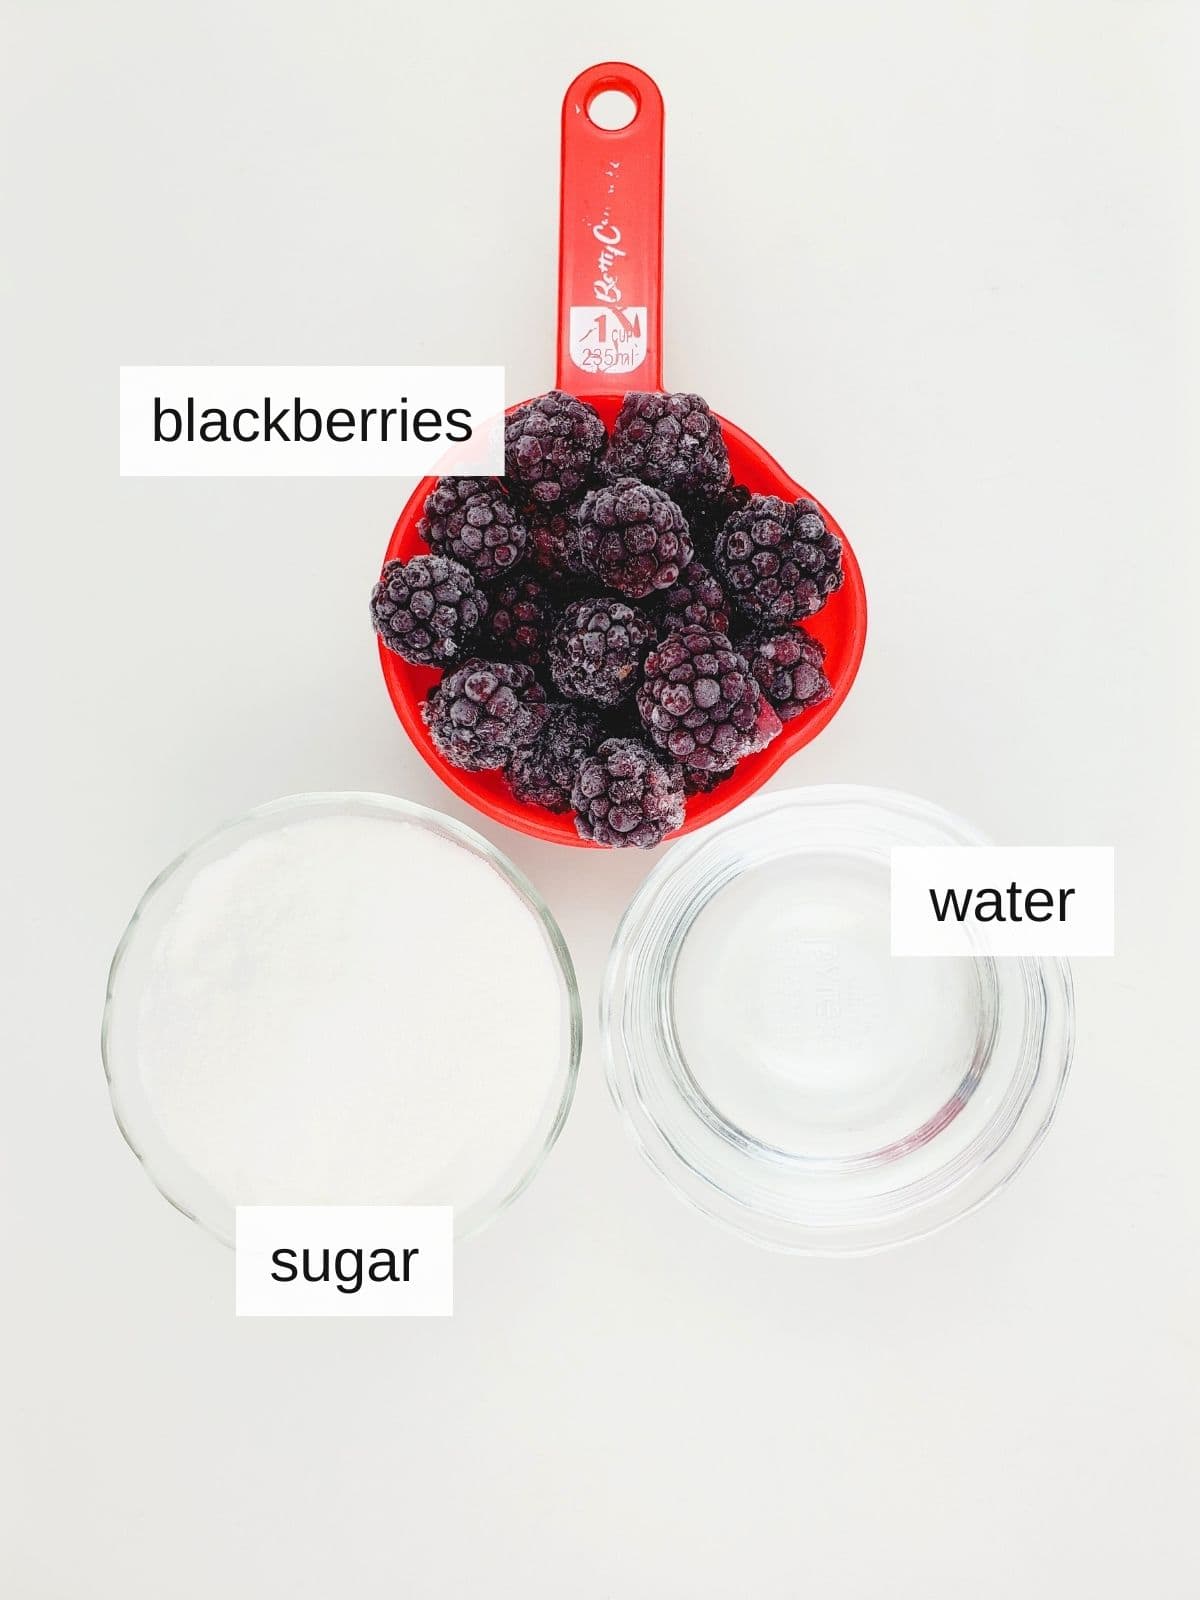 ingredients for blackberry simple syrup, including frozen blackberries, sugar, and water